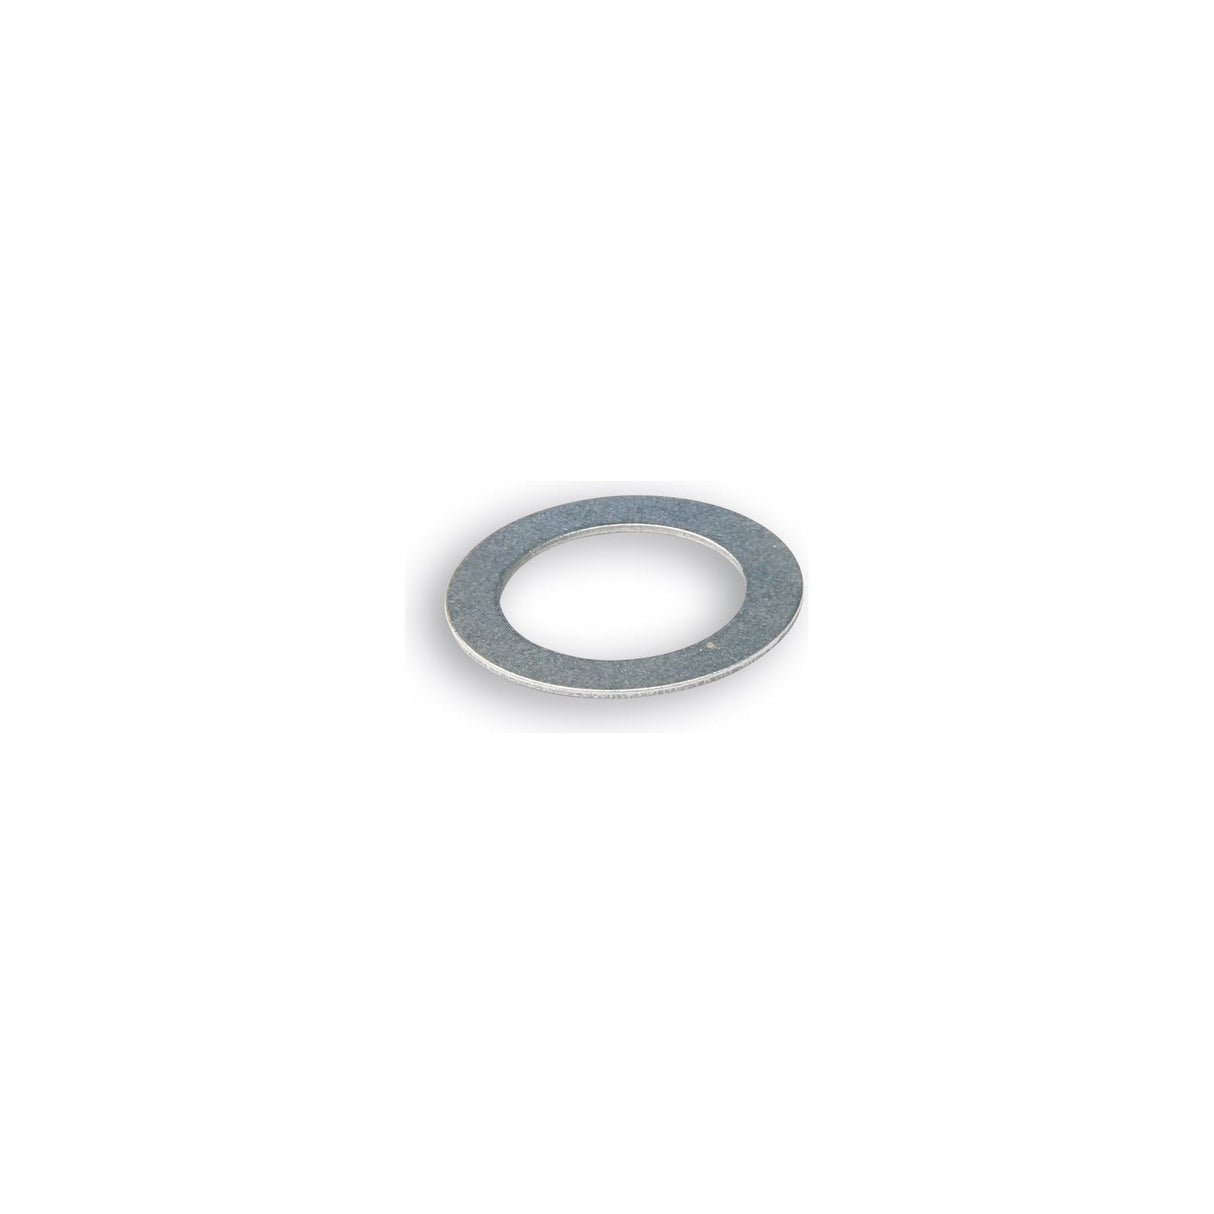 Malossi Over Range - Rear Pulley Clutch Shim 4 PACK